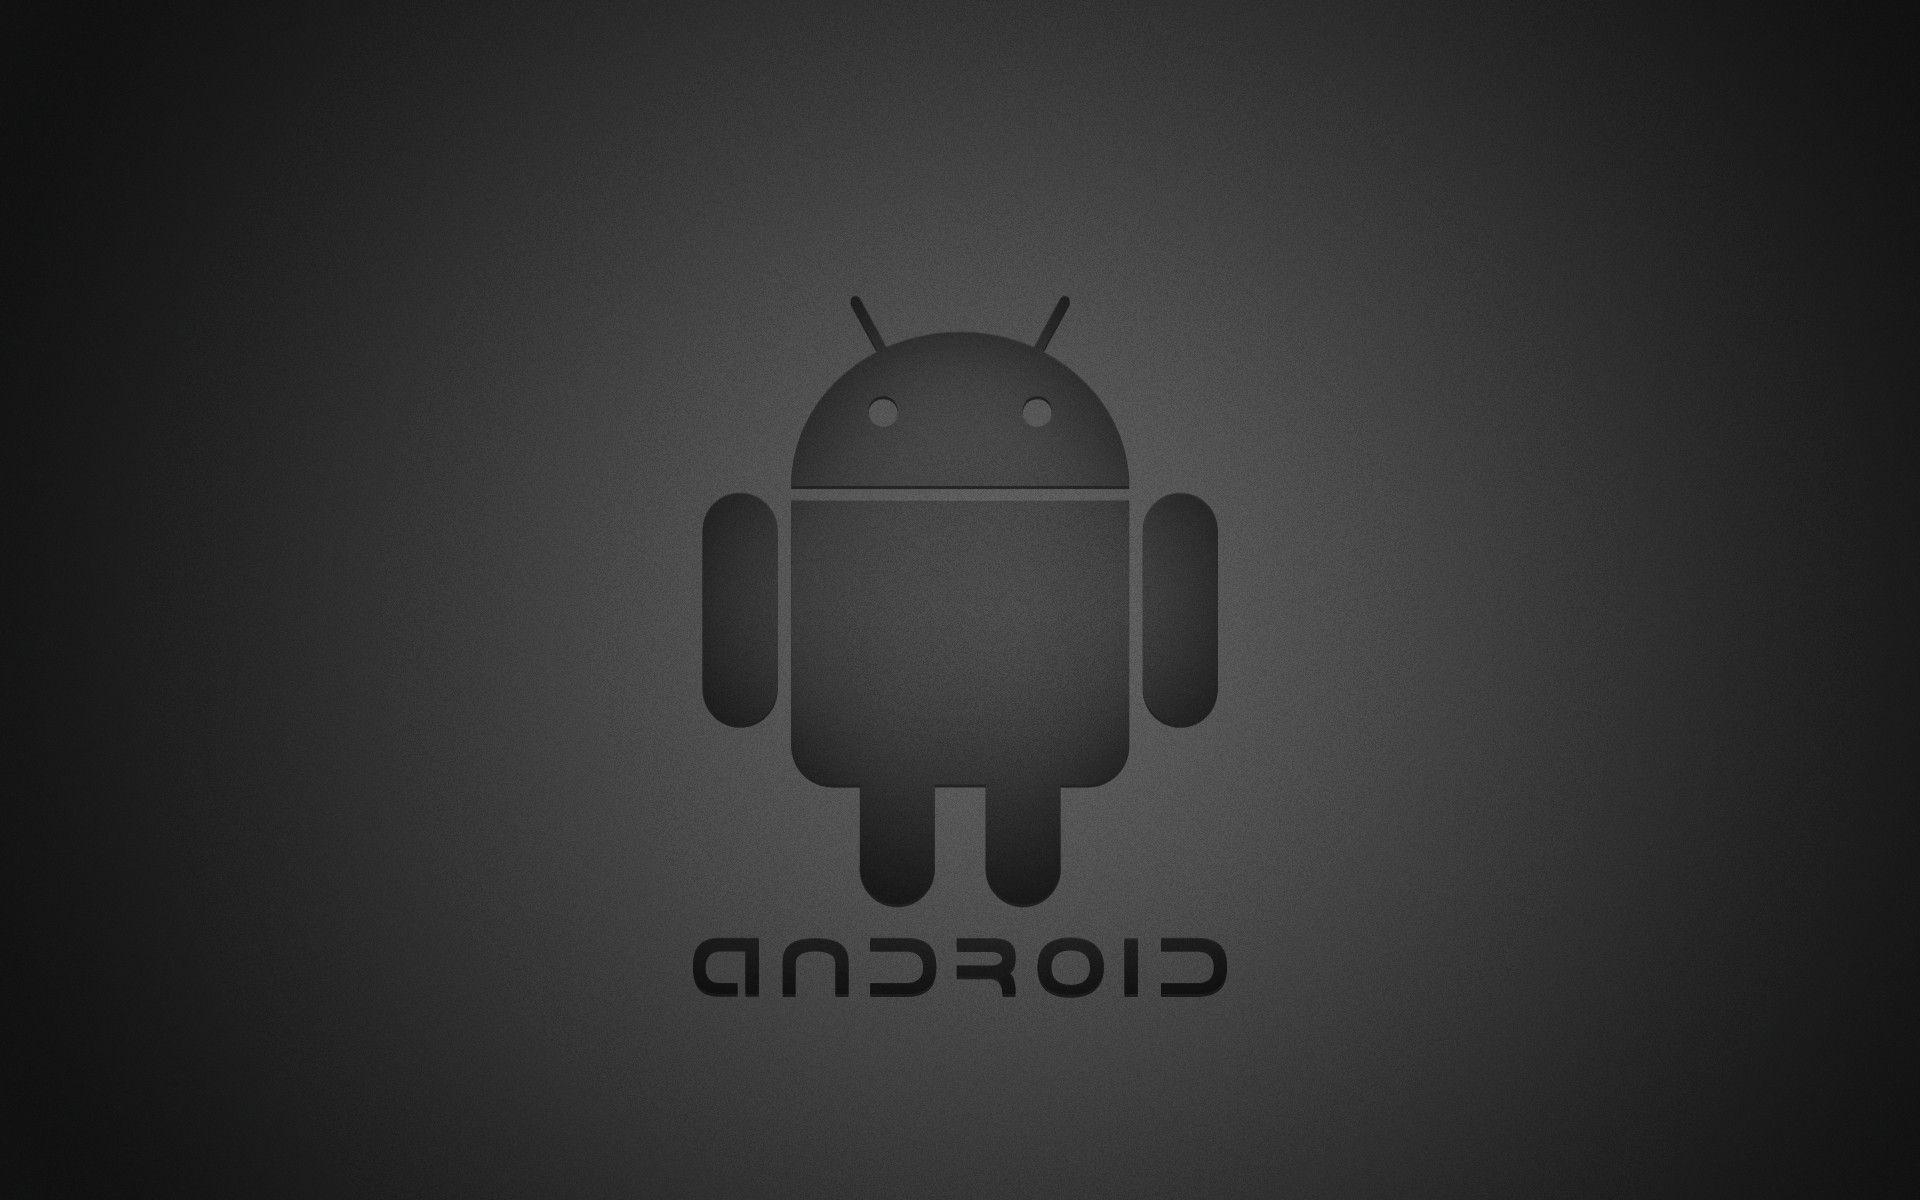 Android Computer Wallpaper, Desktop Background 1920x1200 Id: 128256